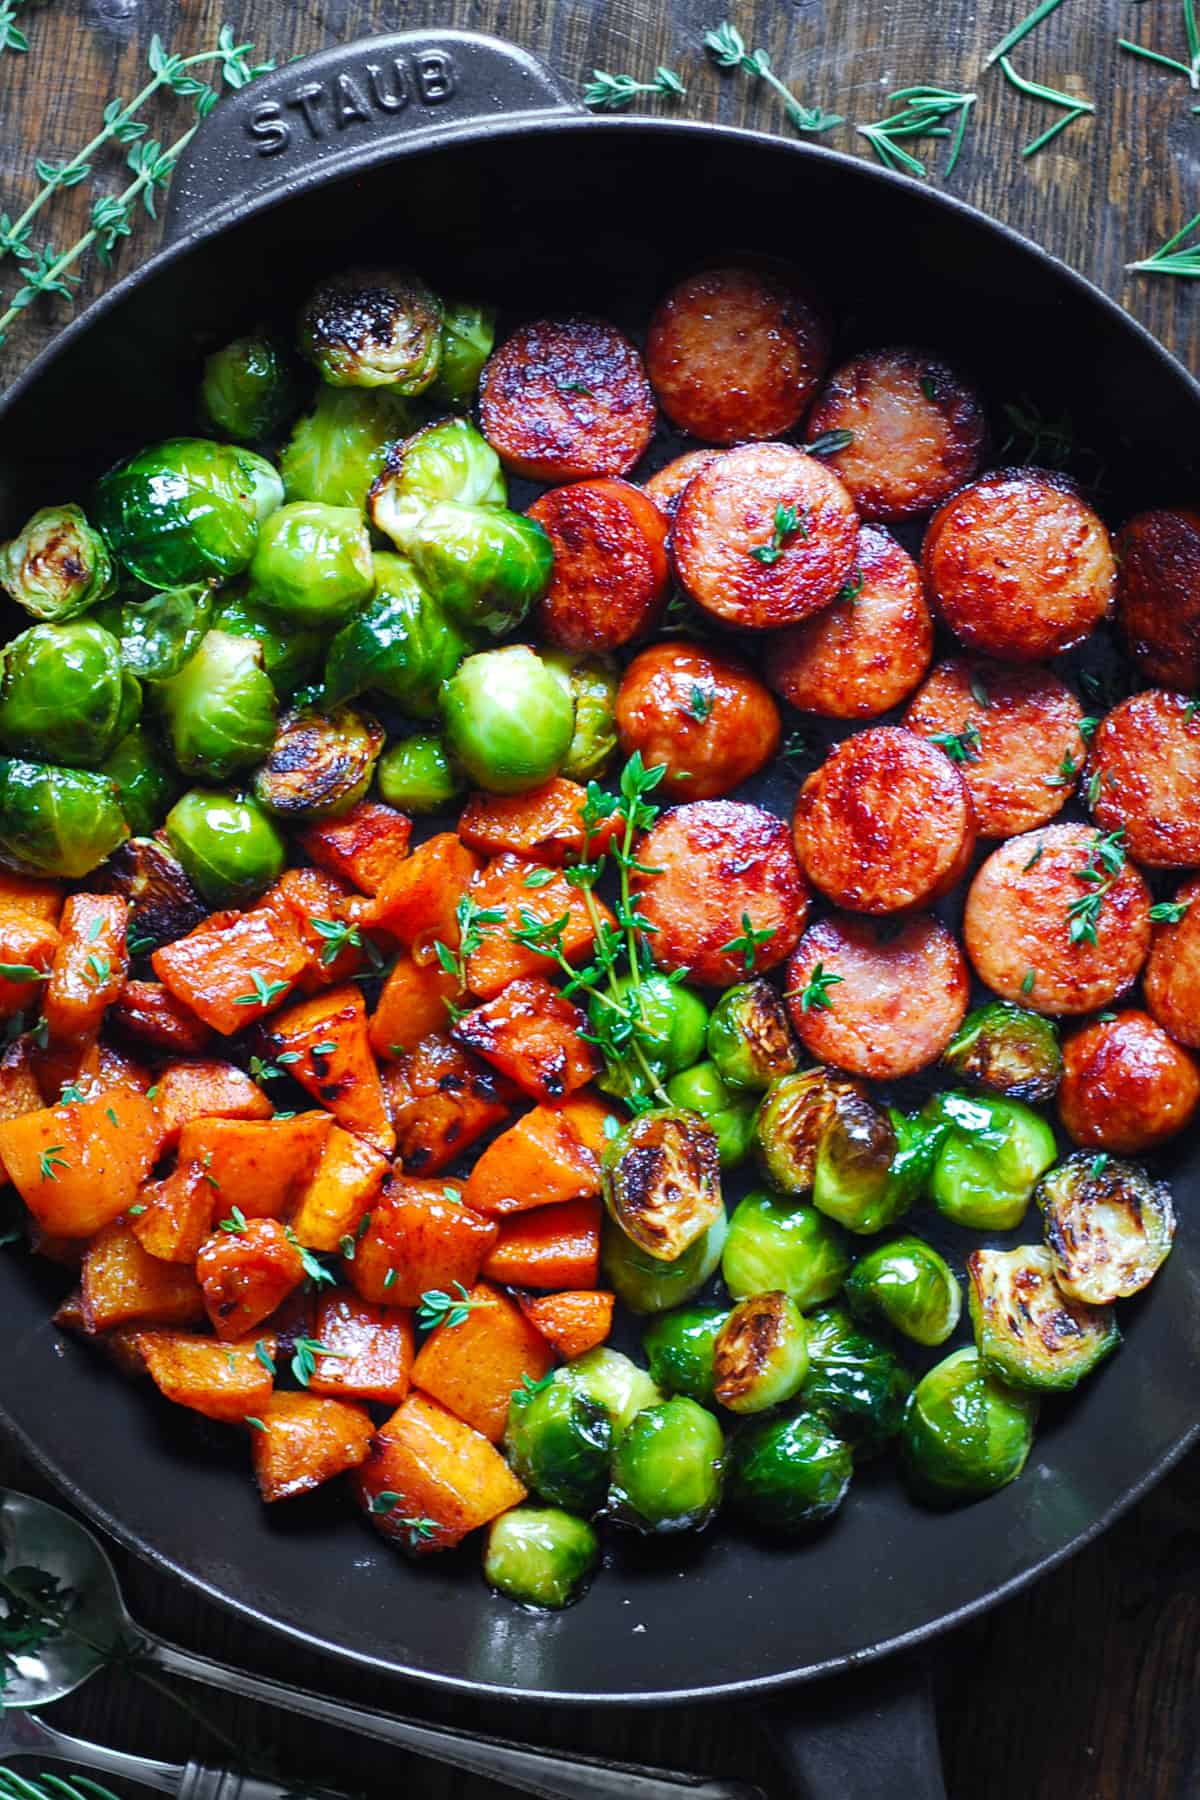 Autumn Sausage Dinner with Roasted Veggies (Butternut Squash and Brussels sprouts) in a cast iron pan.